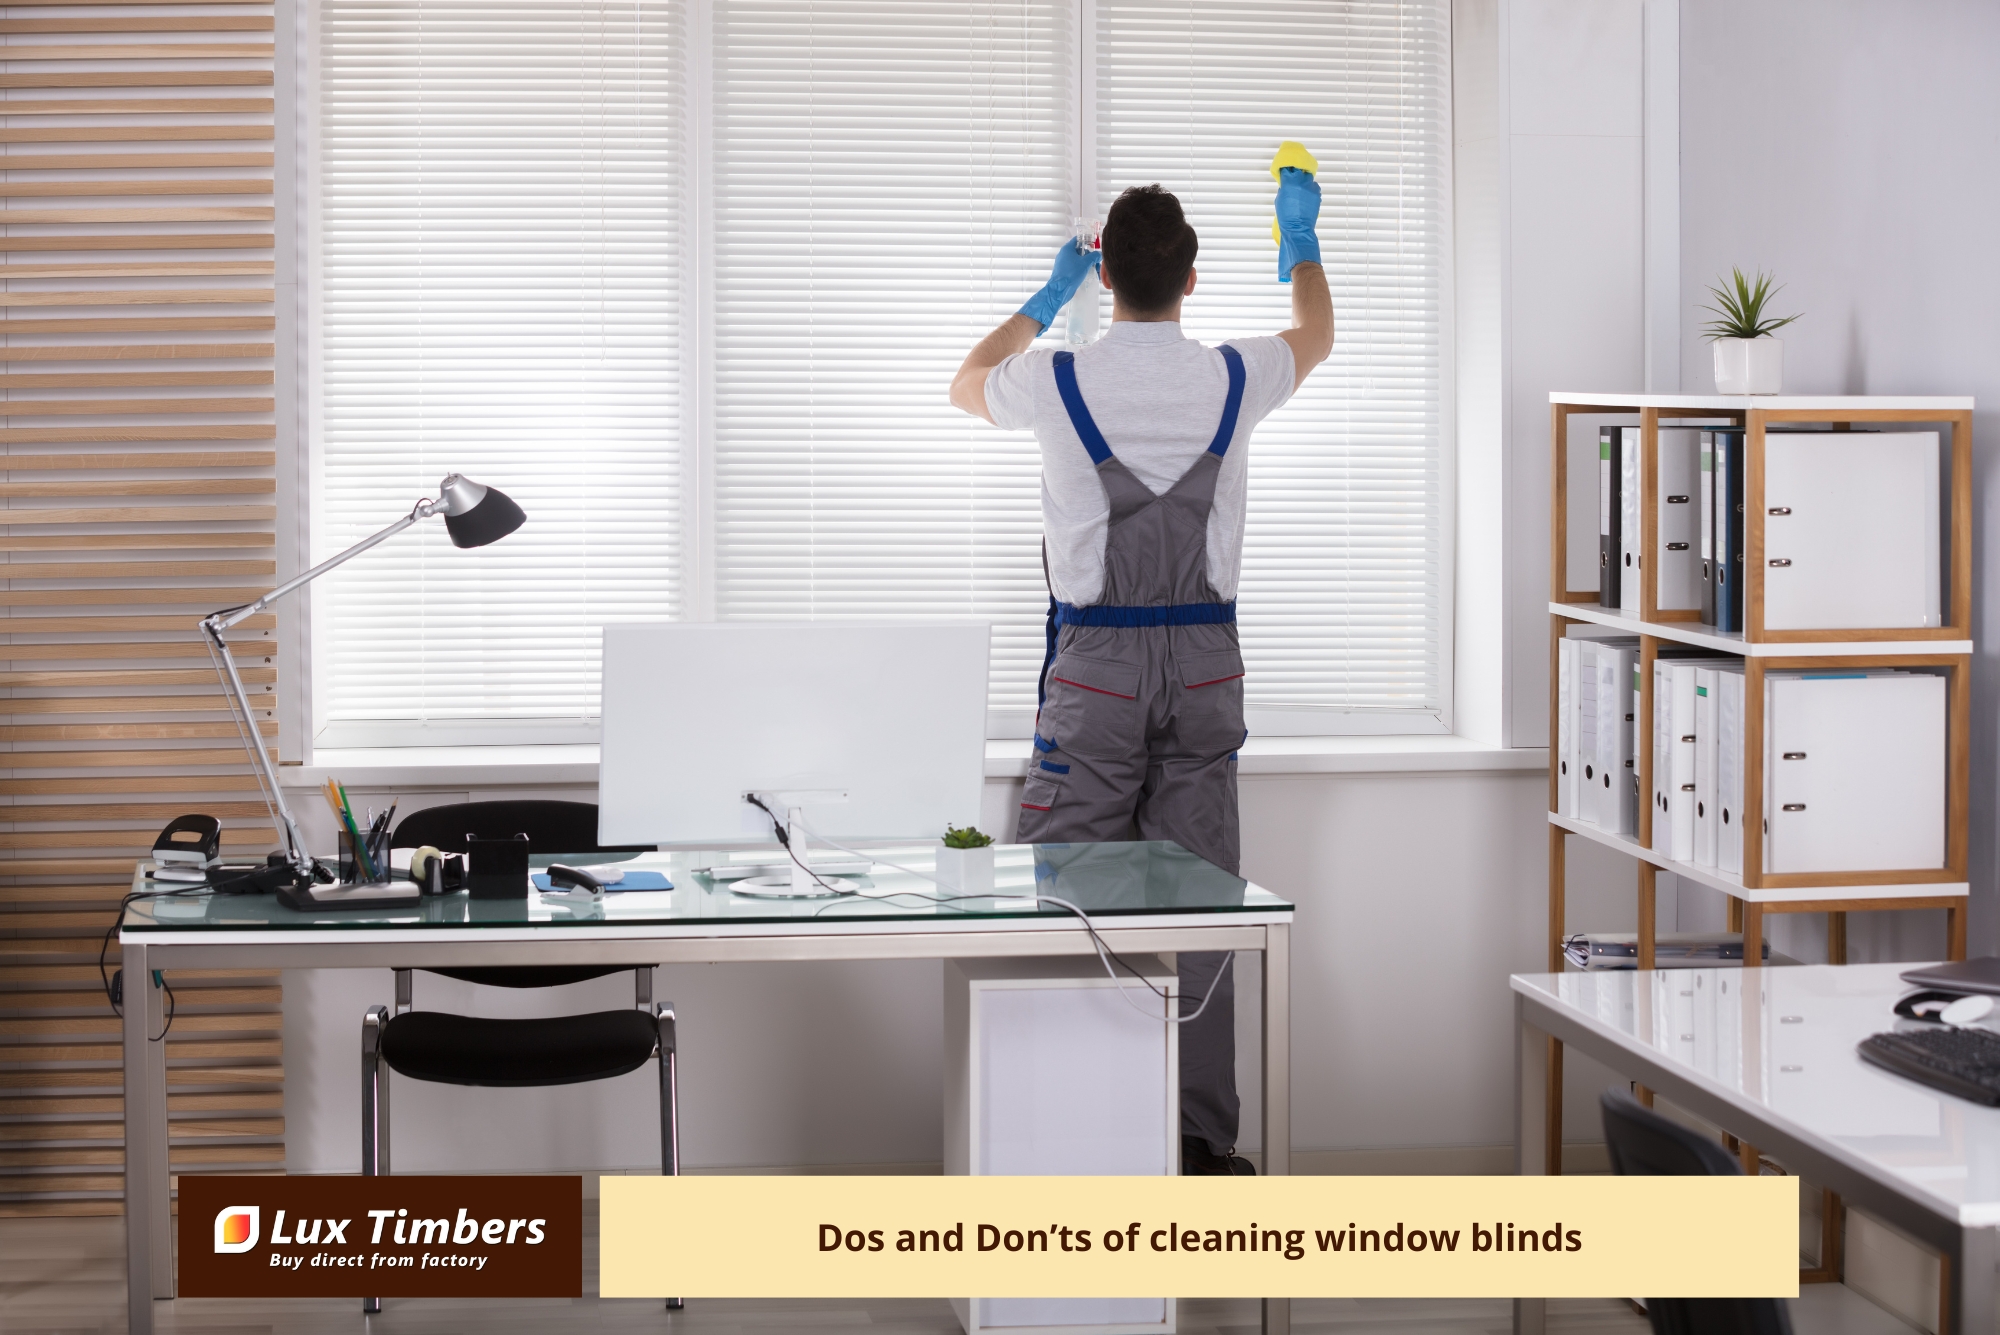 Dos and Don’ts of cleaning window blinds